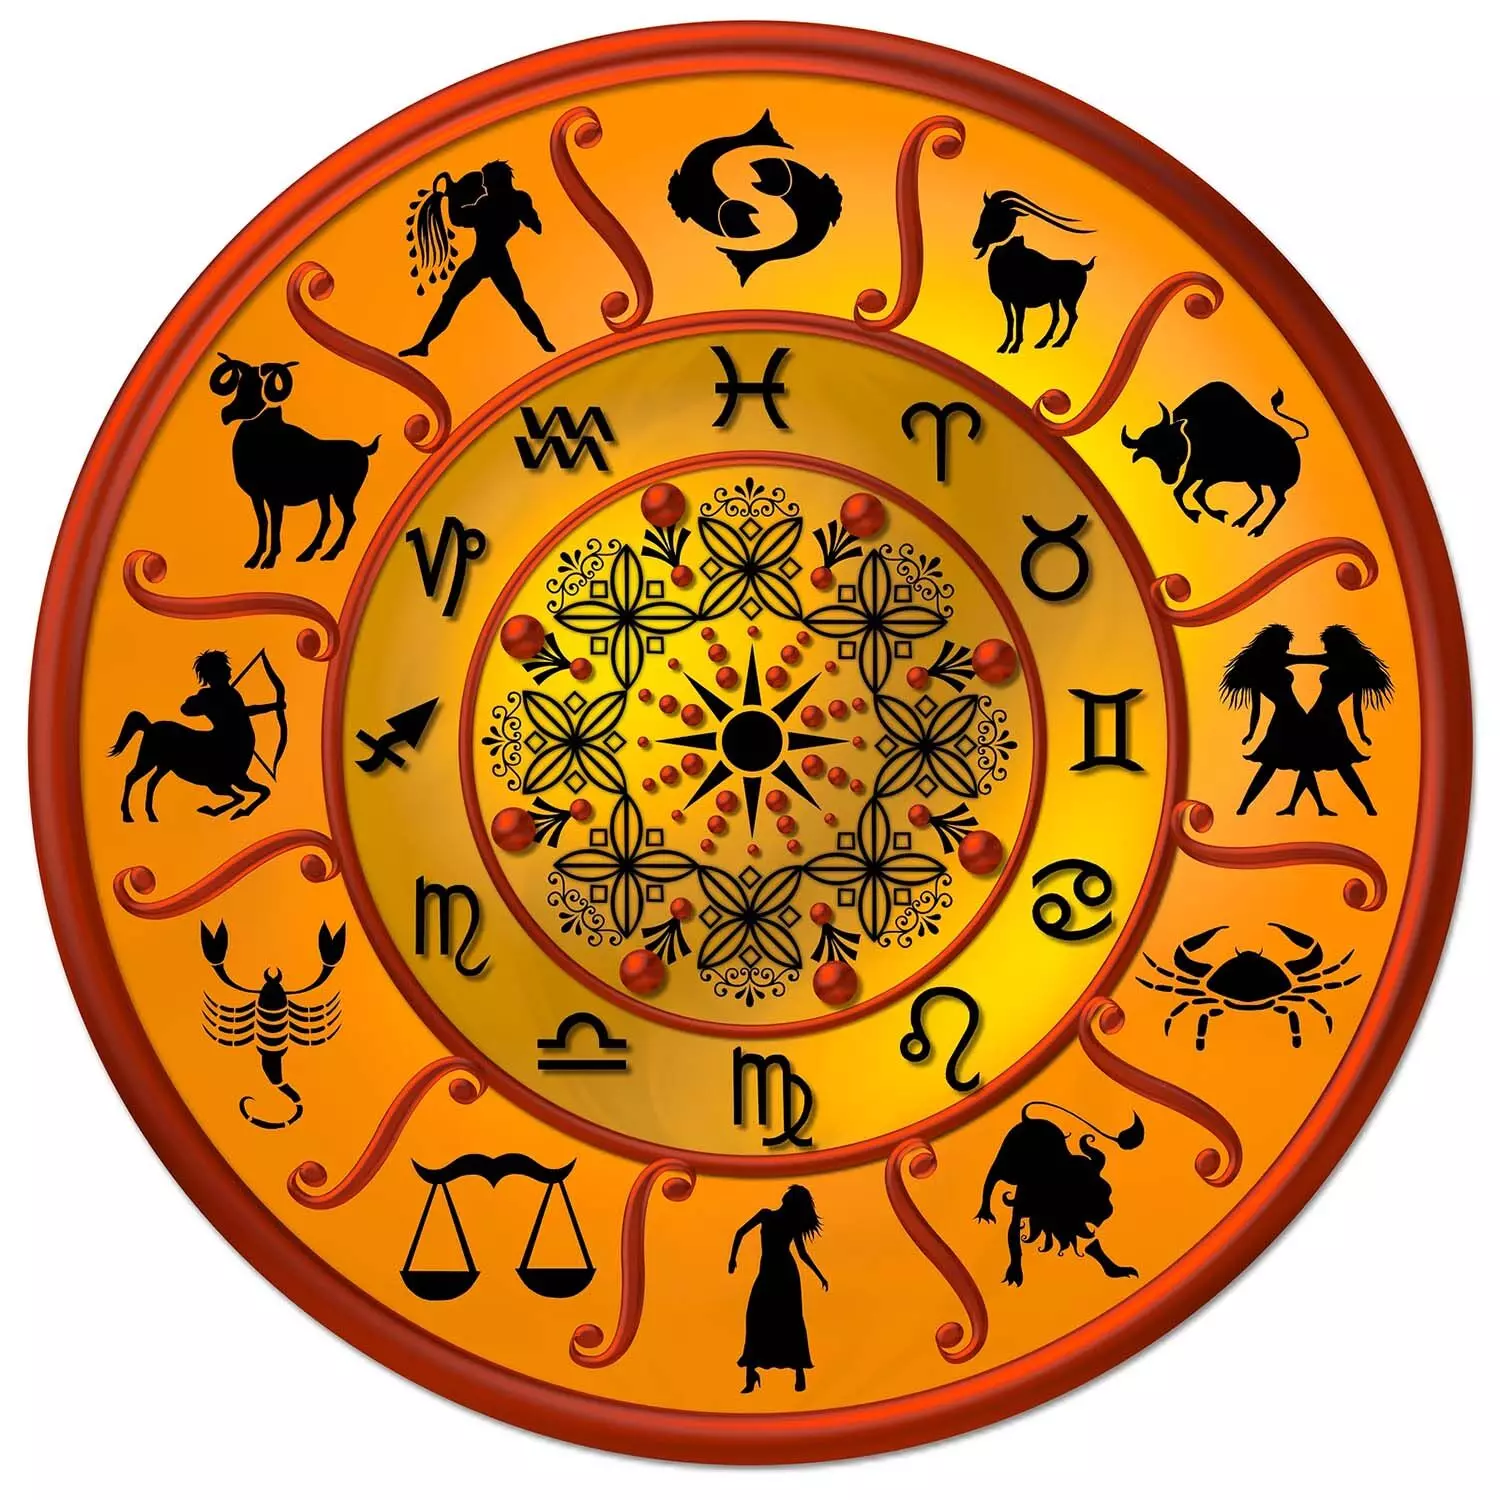 07 July – Know your todays horoscope